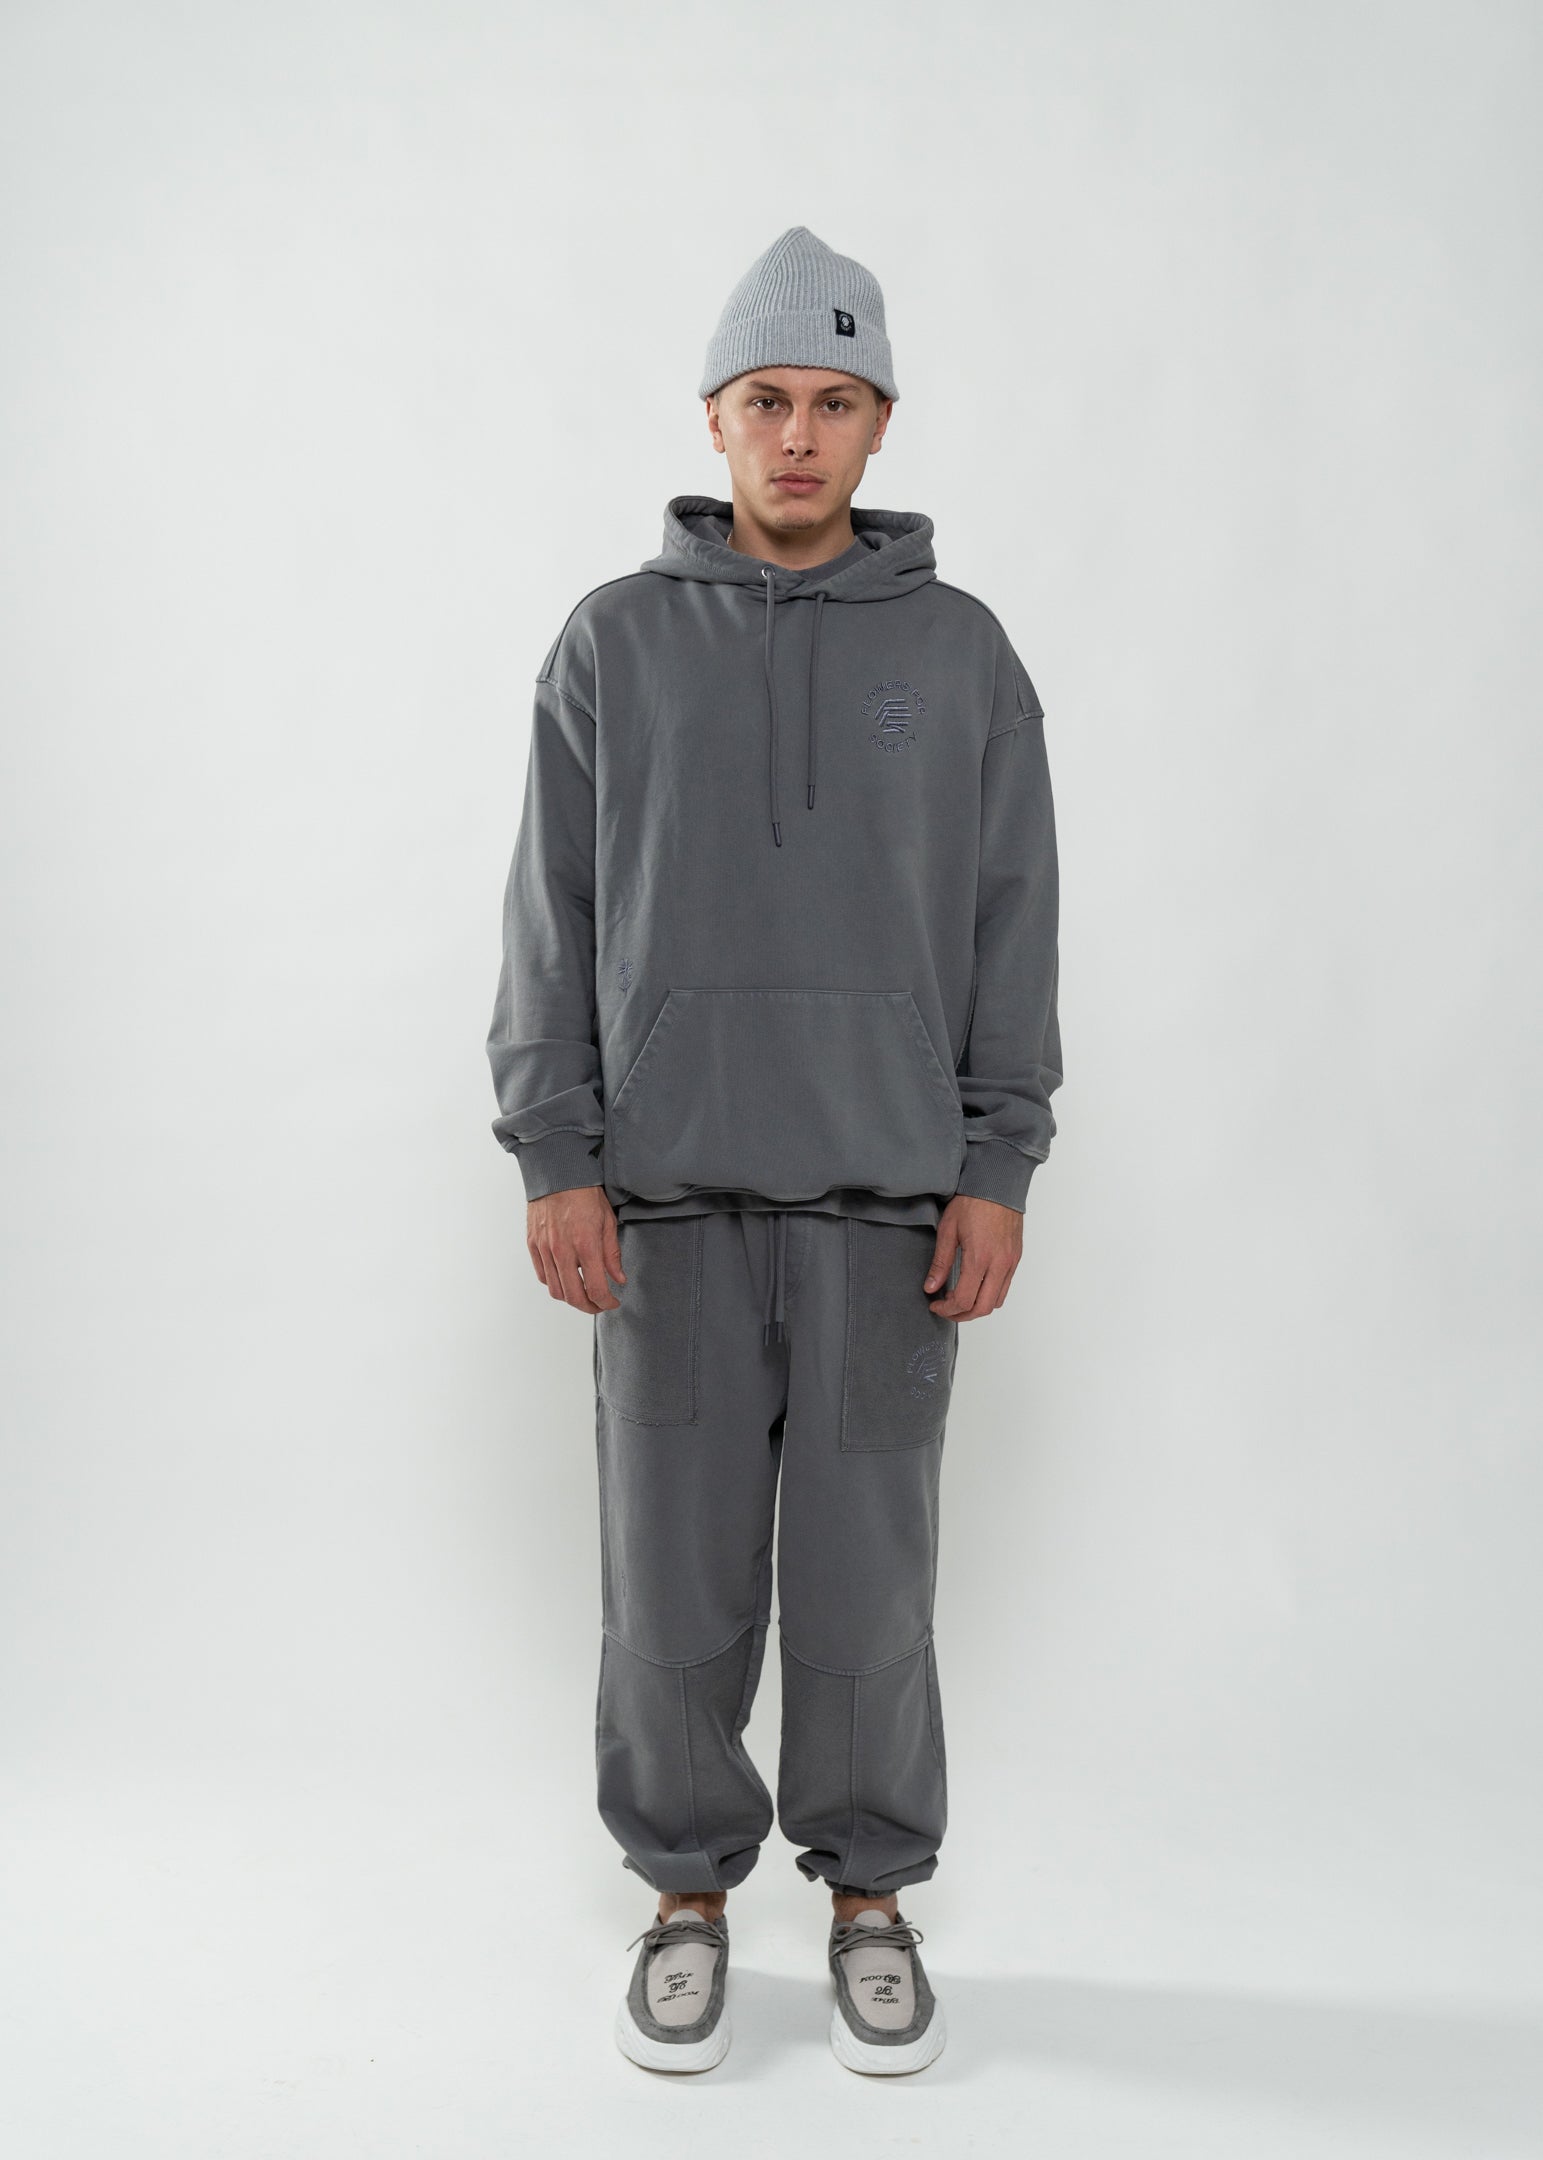 Flowers for Society Basic Jogger pant washed grey frontview worn by model Ben standing